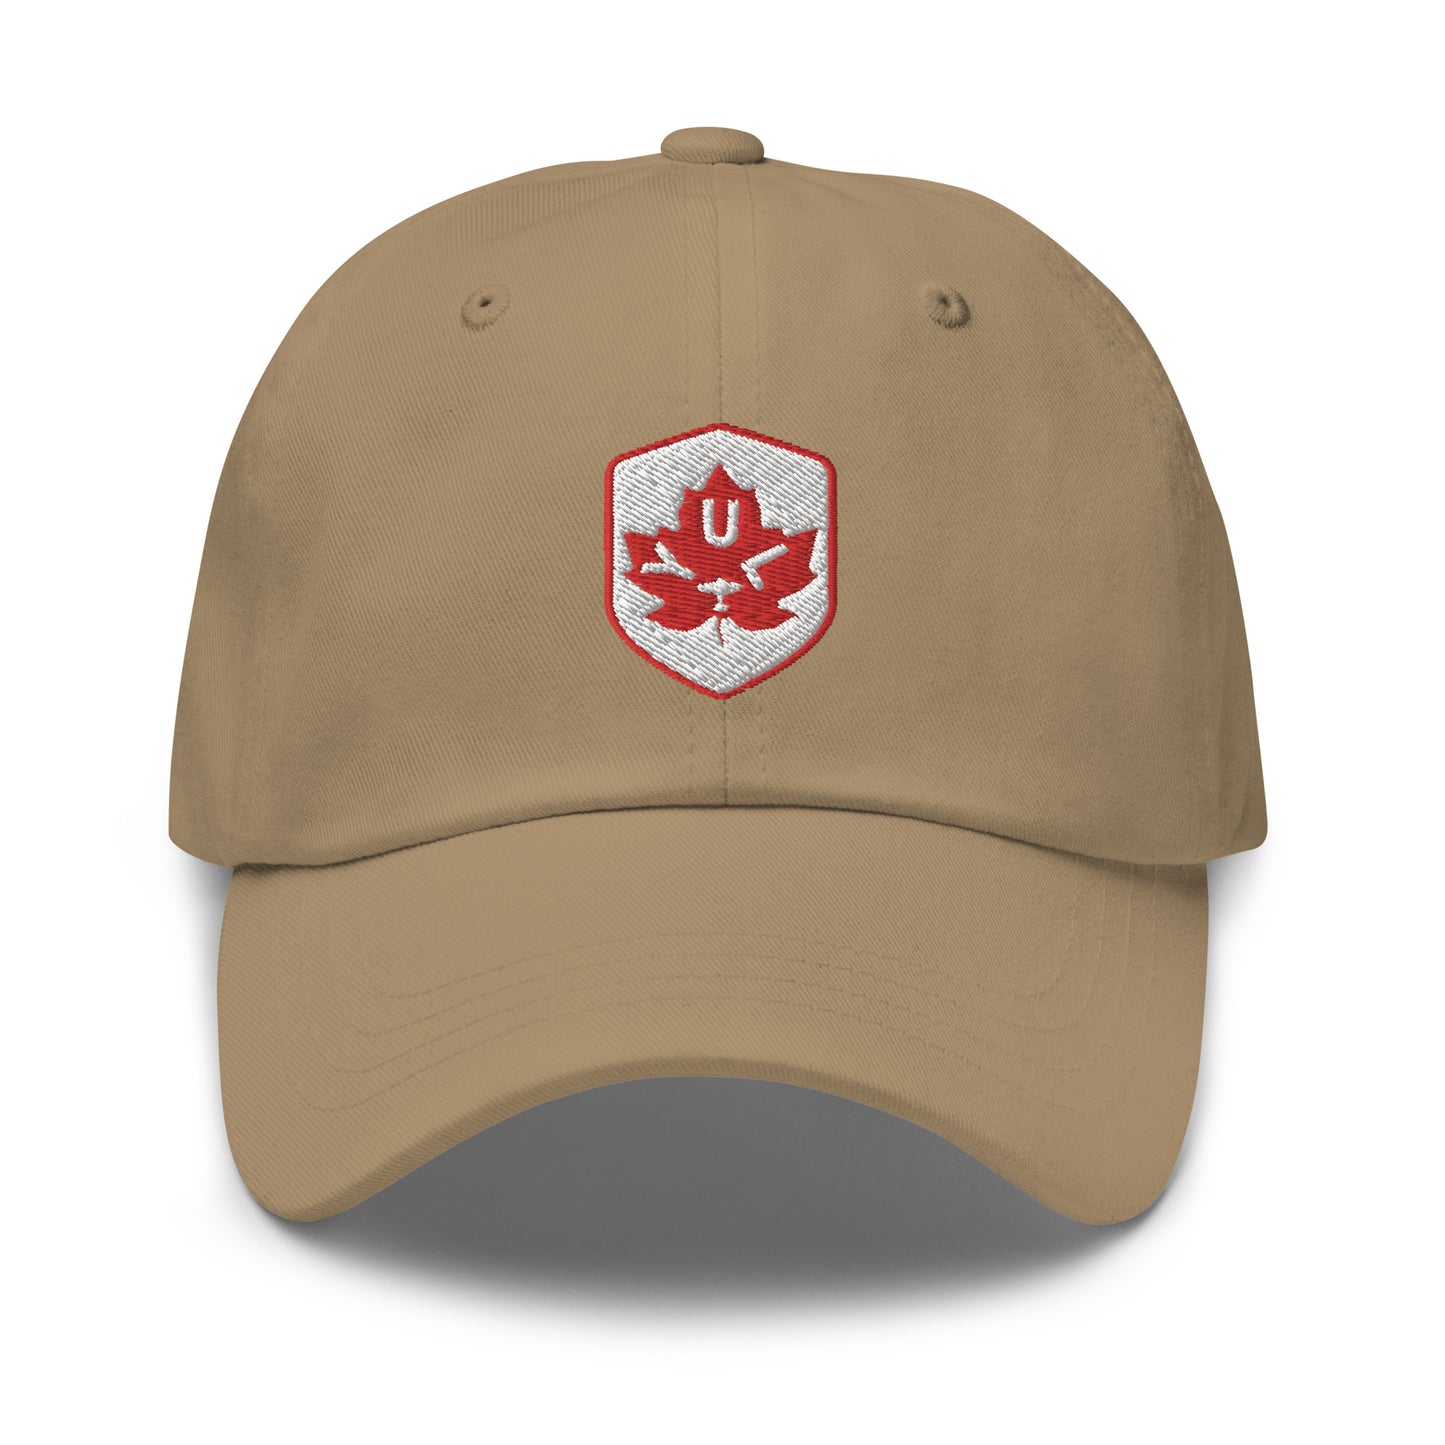 Maple Leaf Baseball Cap - Red/White • YUL Montreal • YHM Designs - Image 21